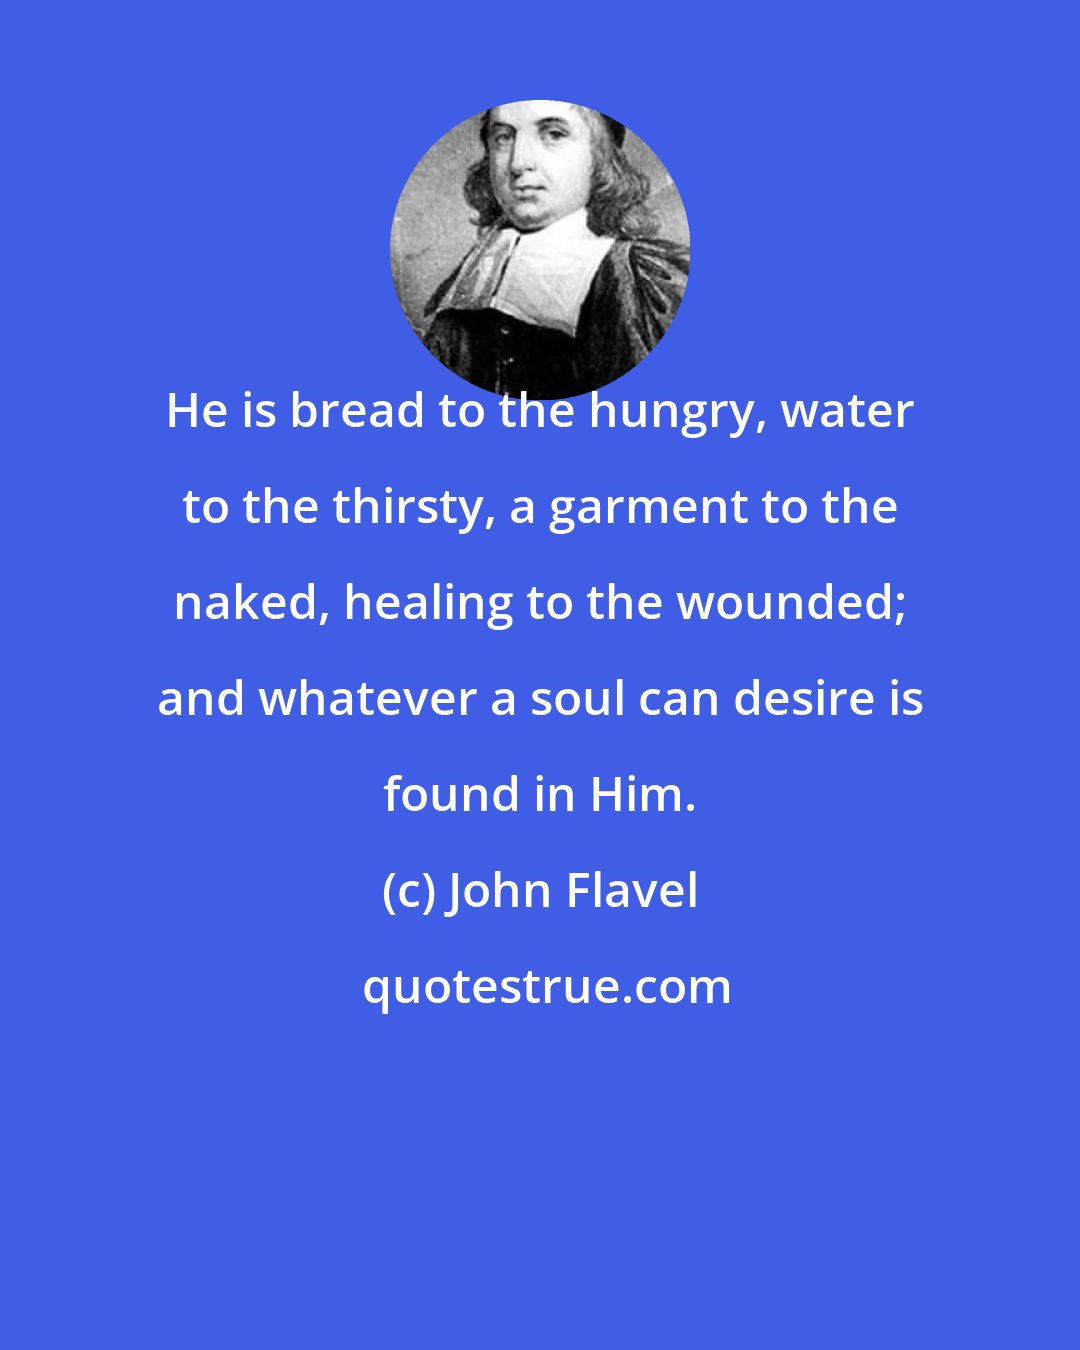 John Flavel: He is bread to the hungry, water to the thirsty, a garment to the naked, healing to the wounded; and whatever a soul can desire is found in Him.